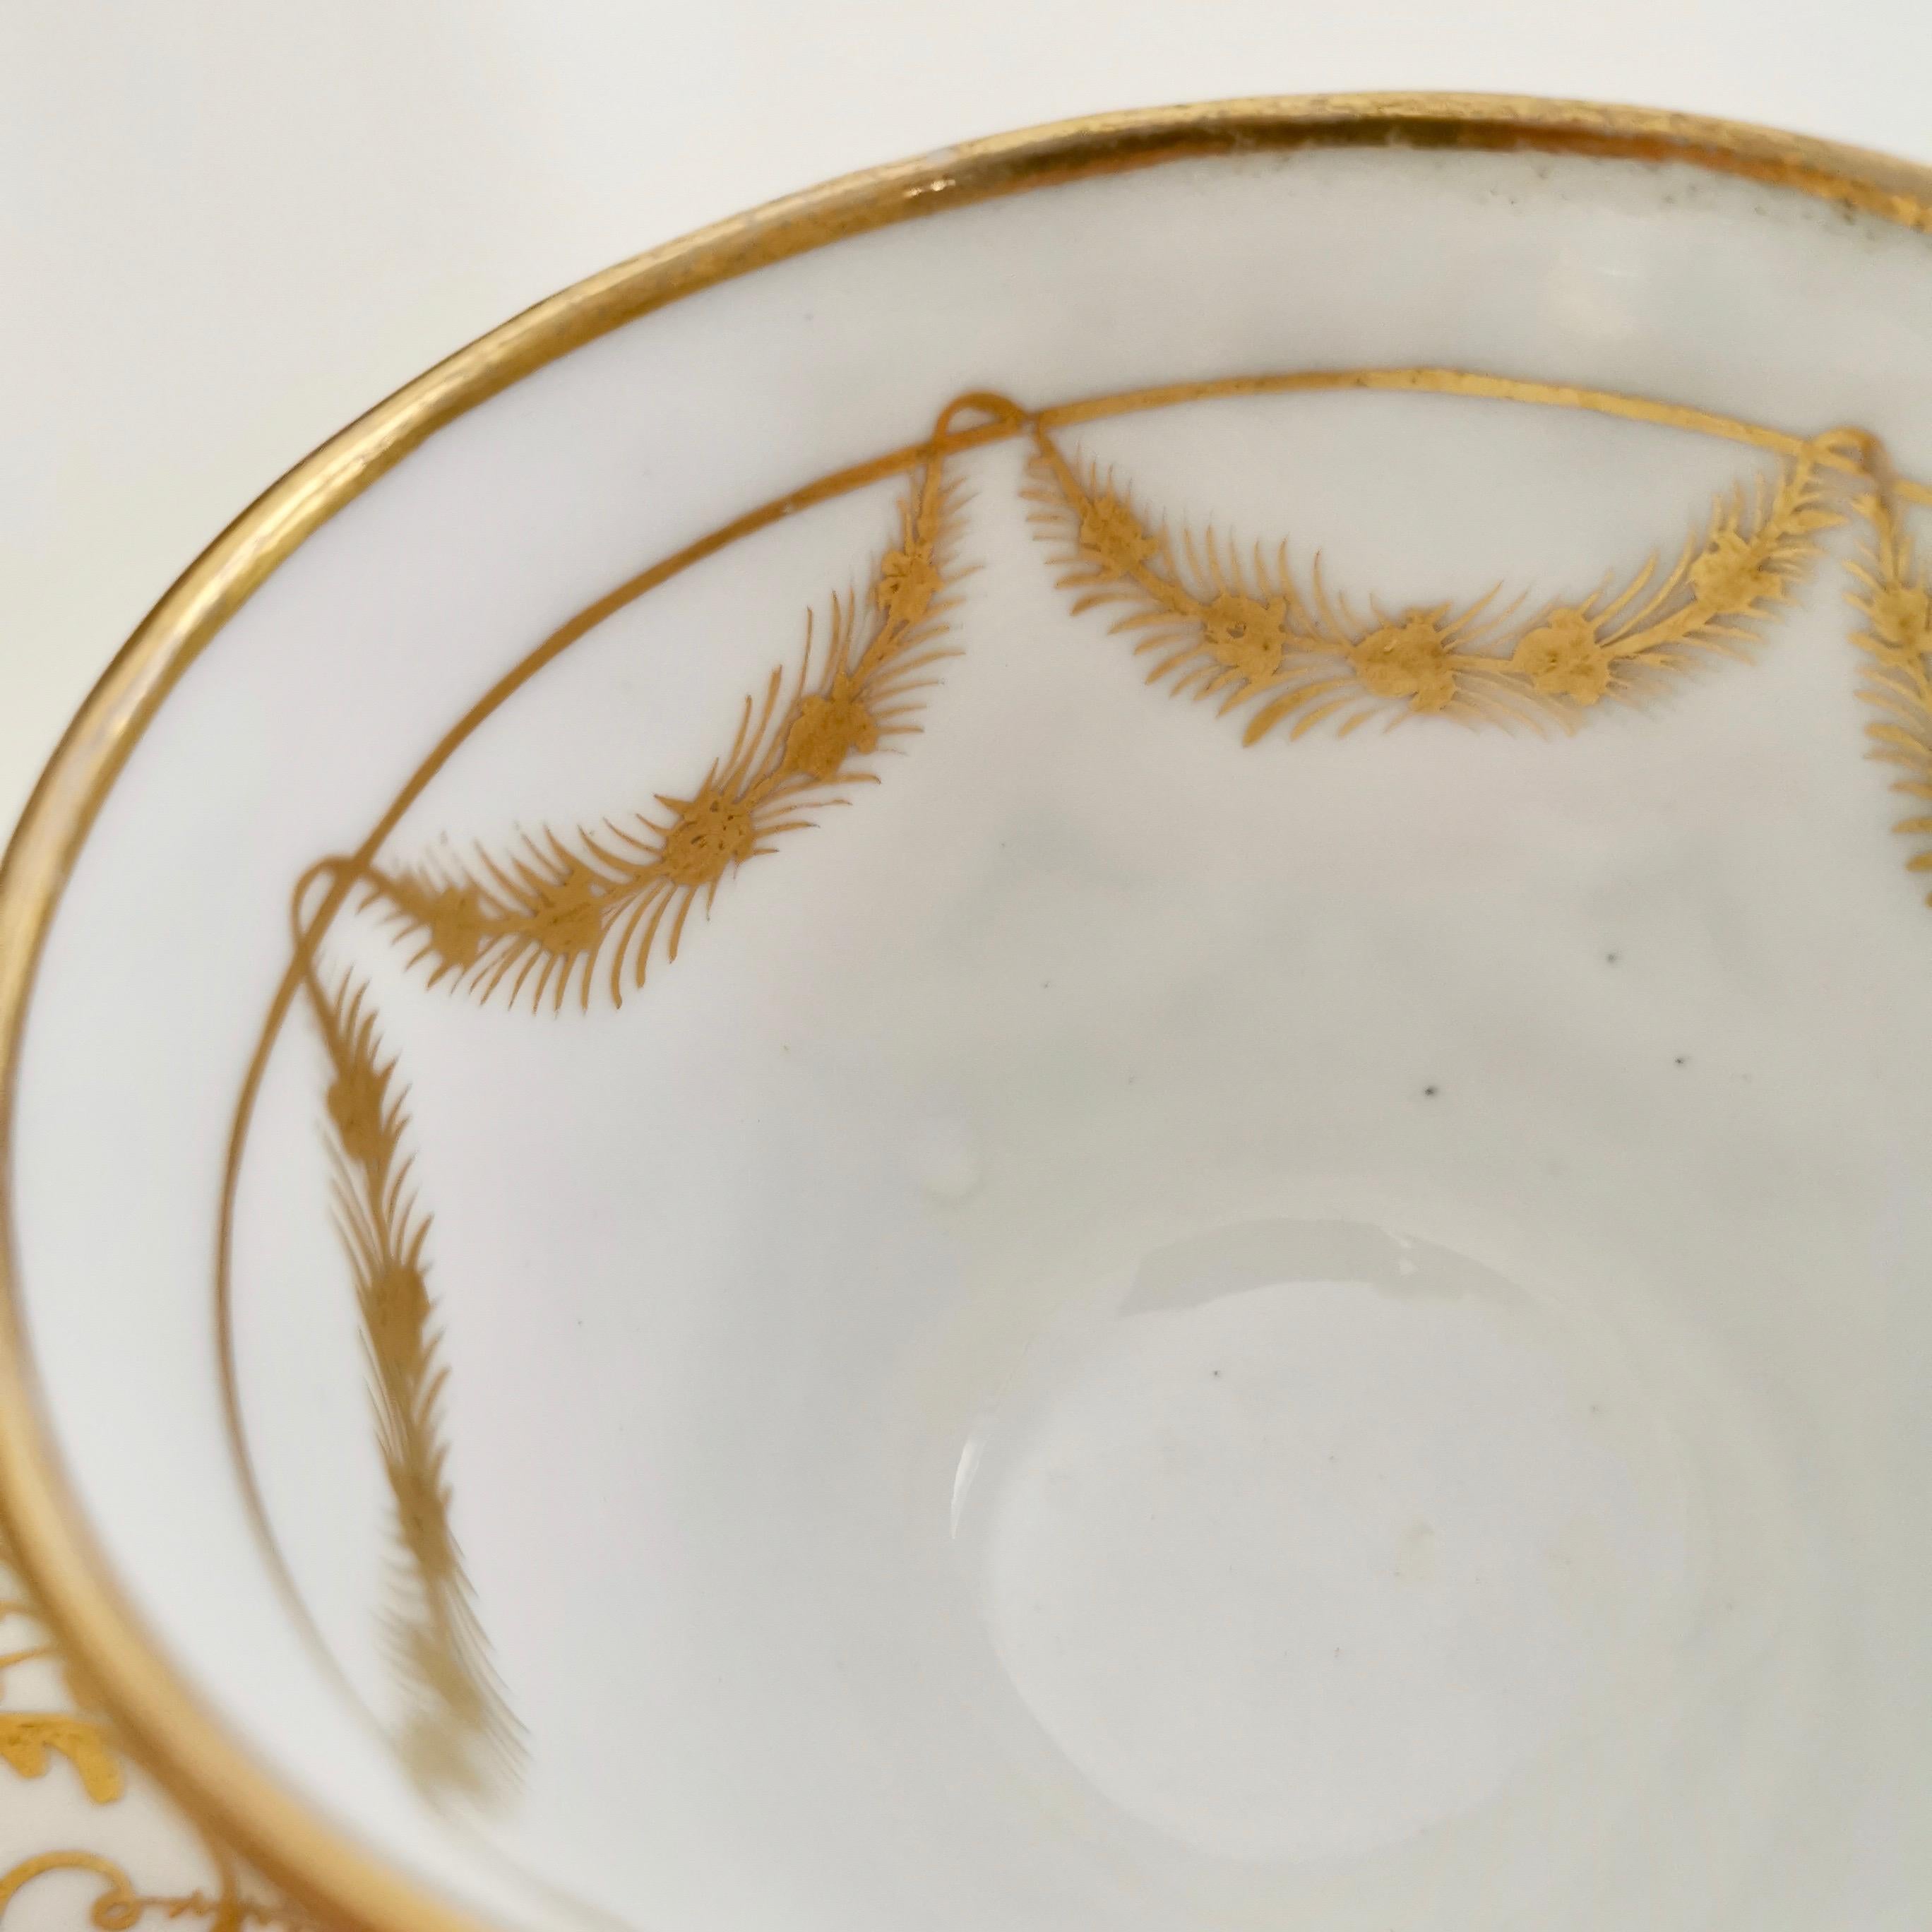 Porcelain New Hall Cup and Saucer, Gilt and Pink Sprigs, Regency, 1815-1820